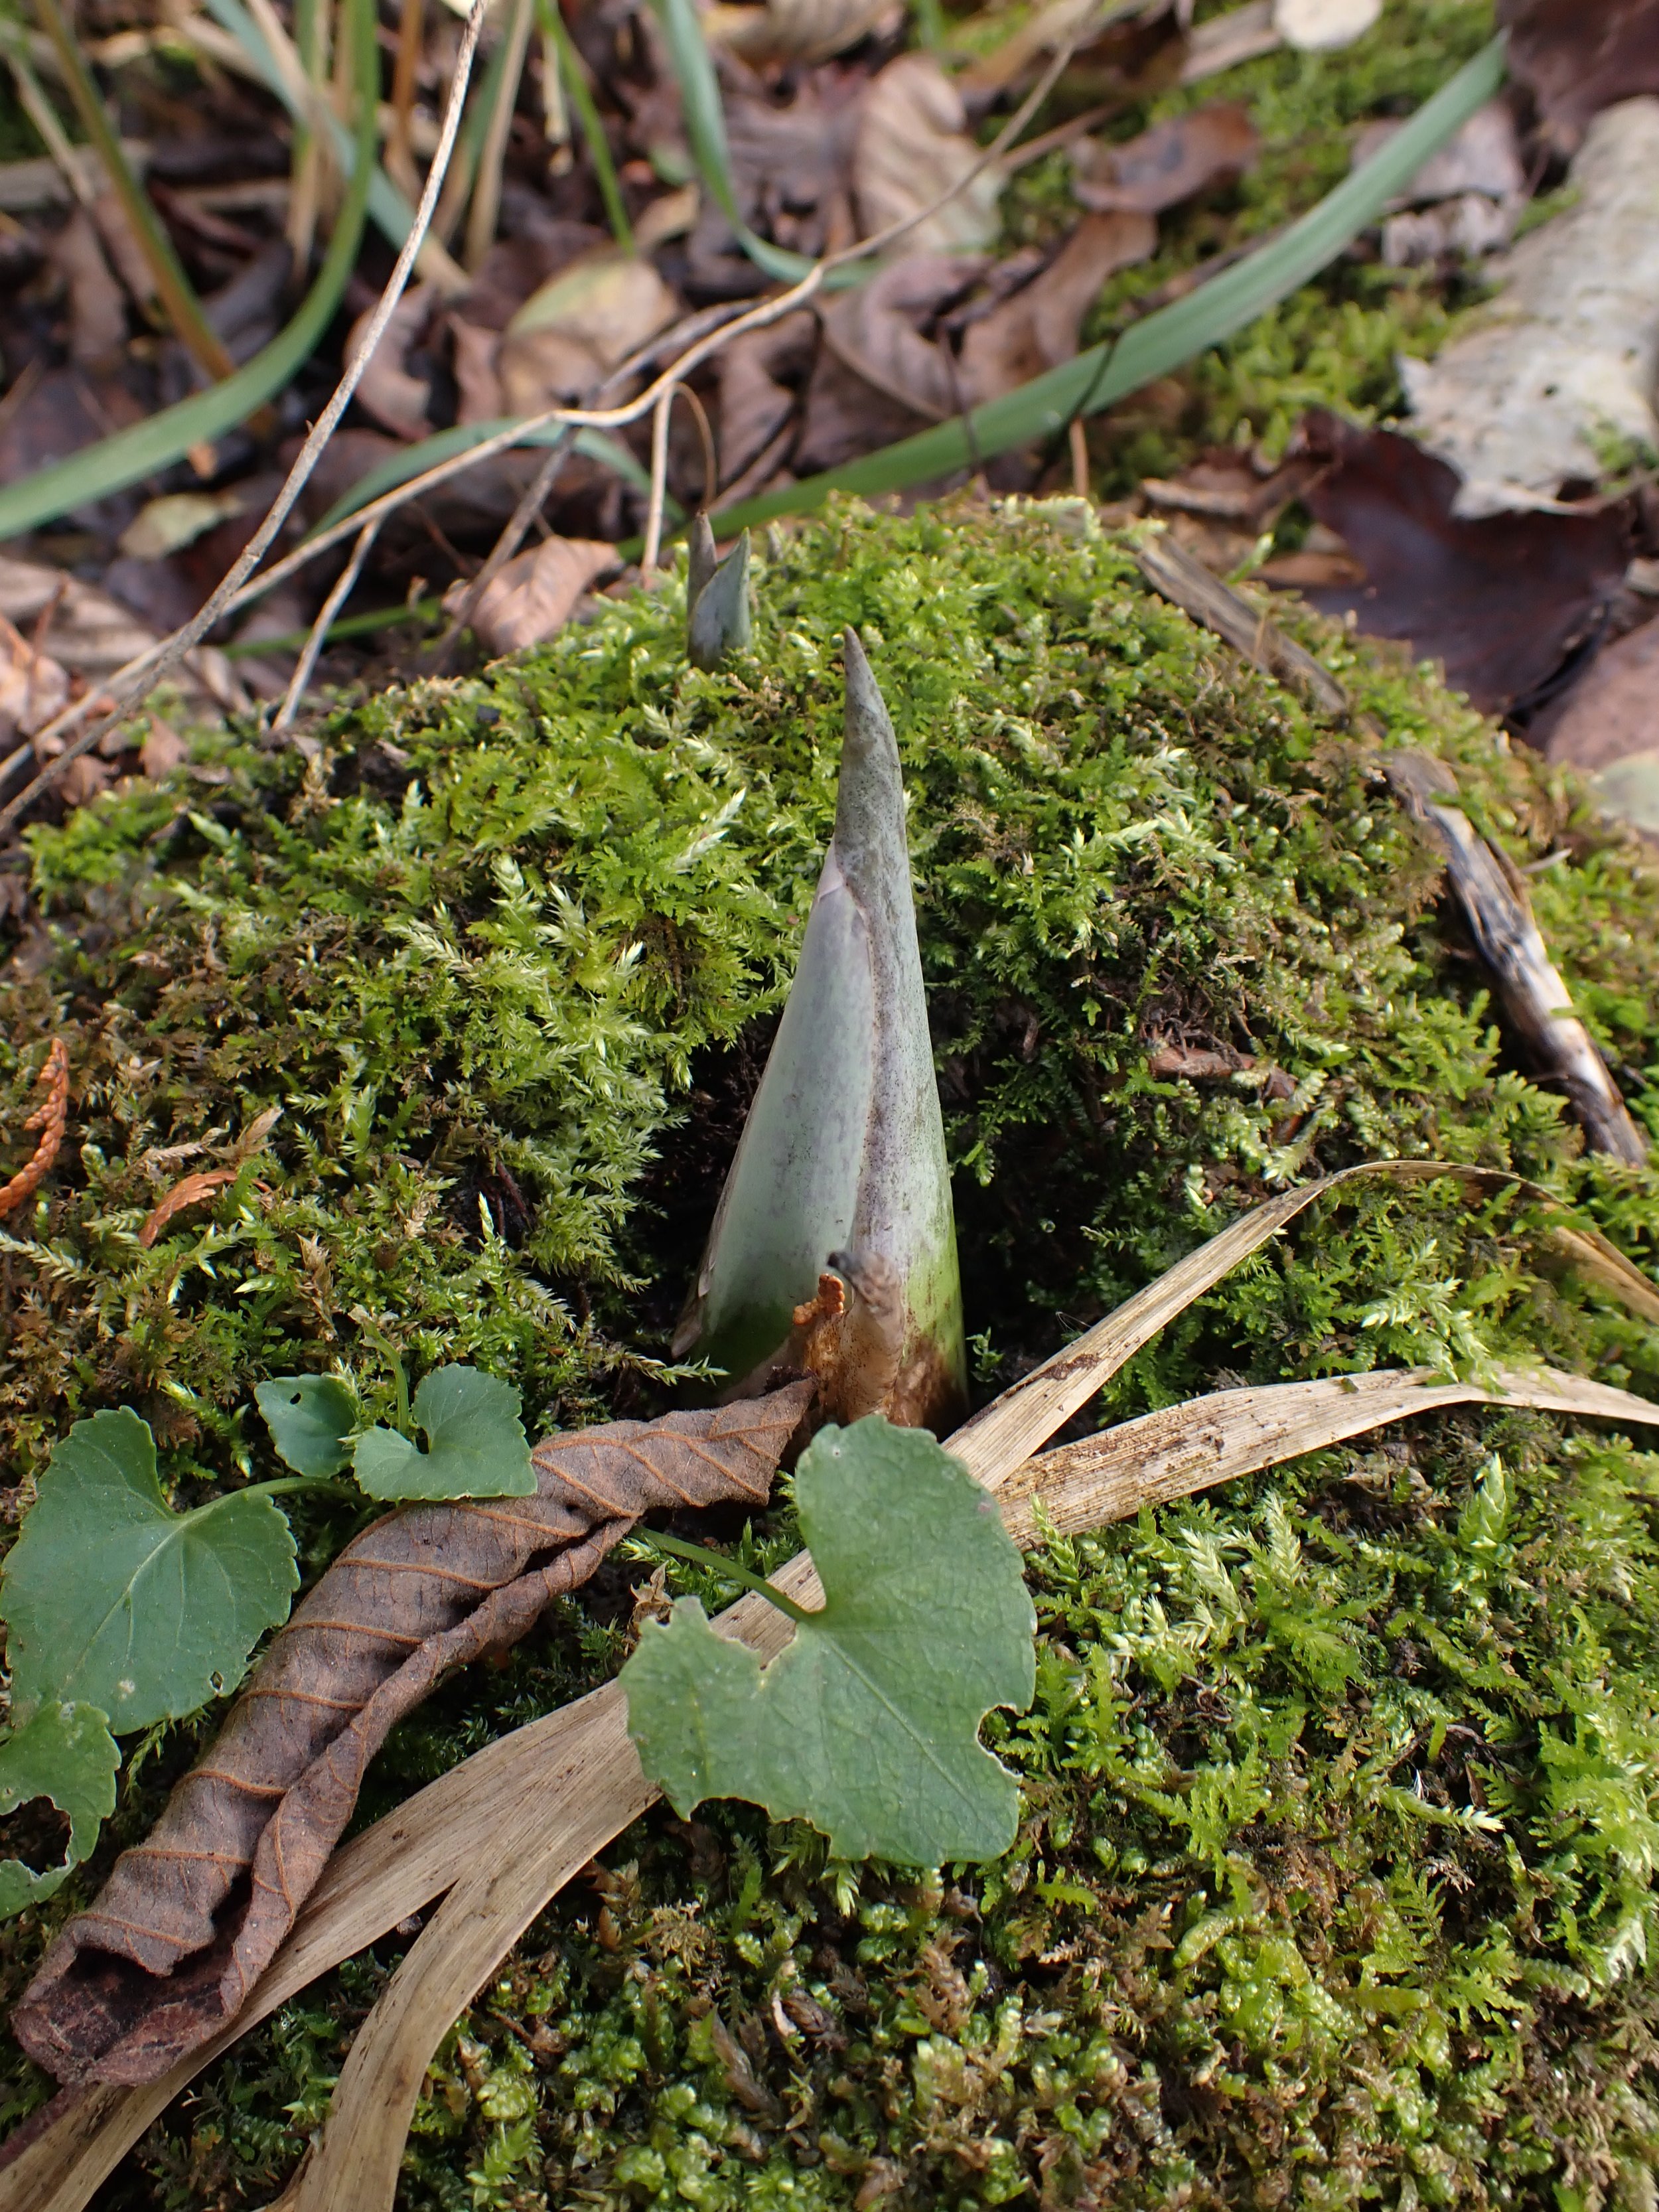  An Eastern Skunk Cabbage bud tucked into a mossy nook in a swamp (Photo by Kasia Zgurzynski)&nbsp;. 